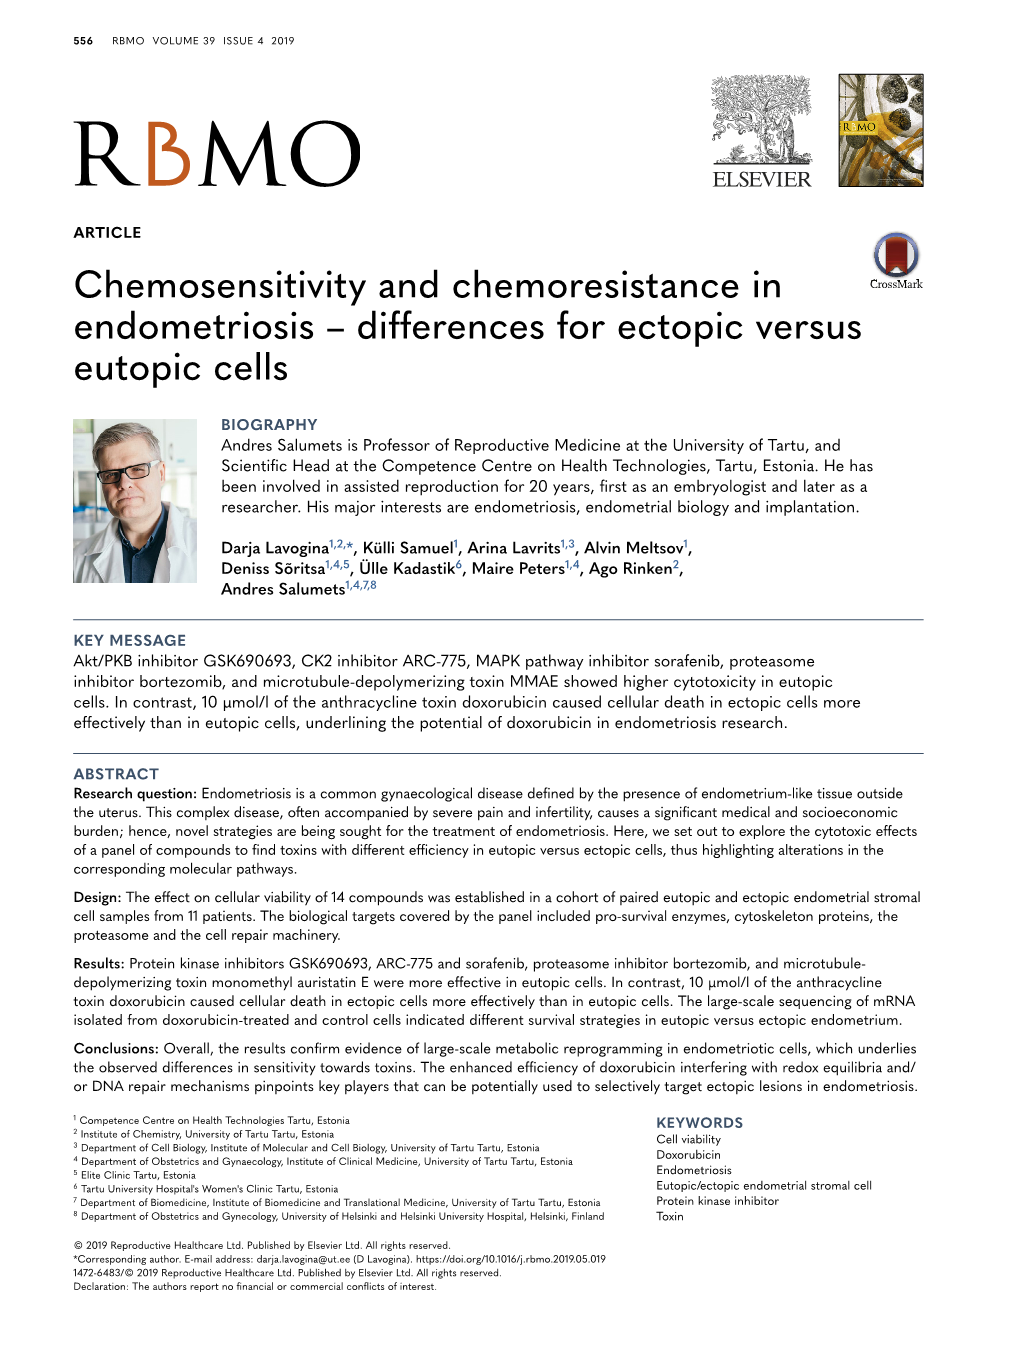 Differences for Ectopic Versus Eutopic Cells